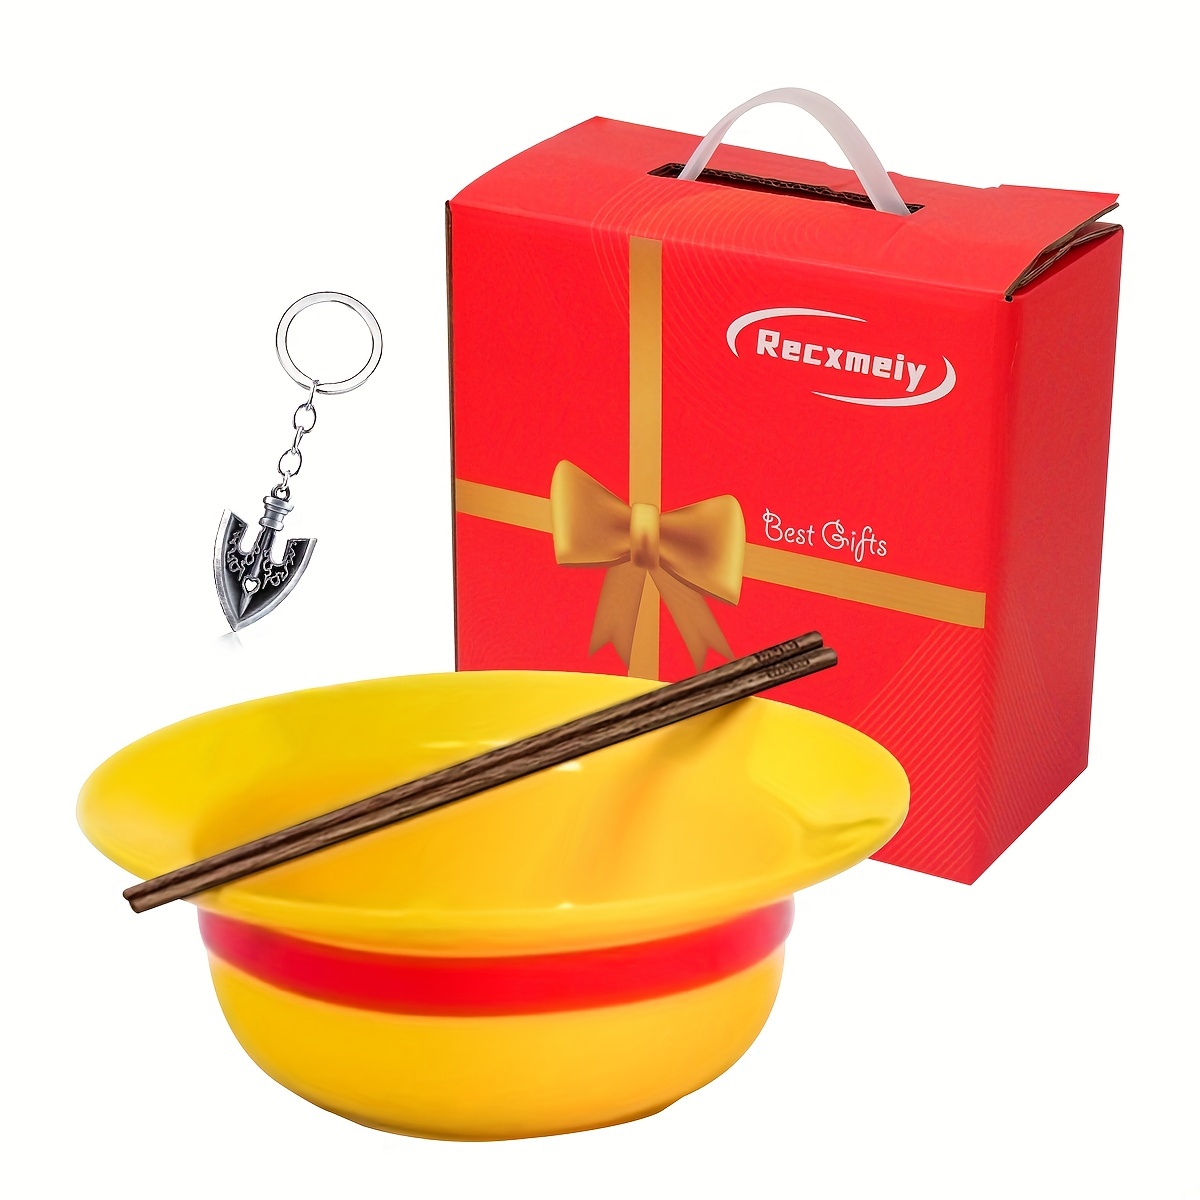 Anime One Piece Ramen Bowl Set with Chopsticks - Luffy Straw Hat Design for  Noodles, Udon, Snacks, and More - One Piece Gift for Anime Fans and